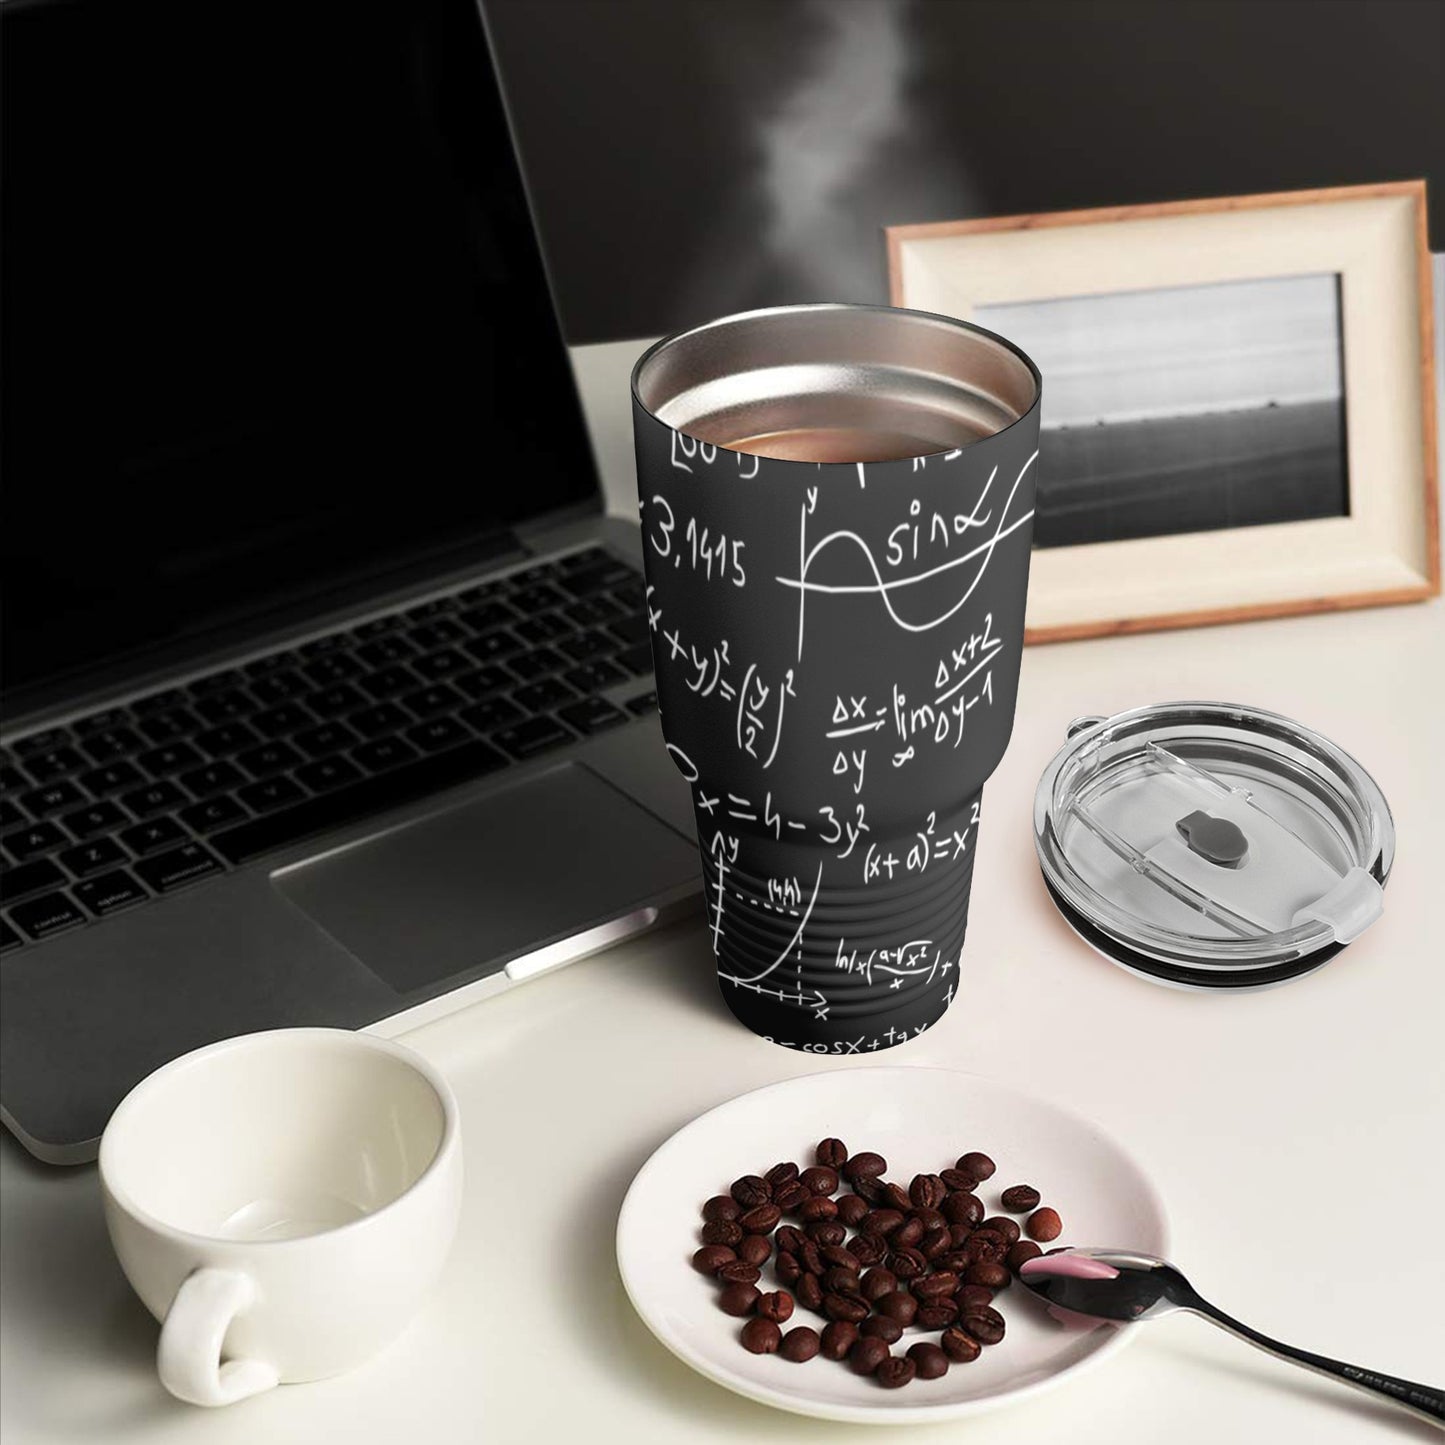 Equations - 30oz Insulated Stainless Steel Mobile Tumbler 30oz Insulated Stainless Steel Mobile Tumbler Maths Science